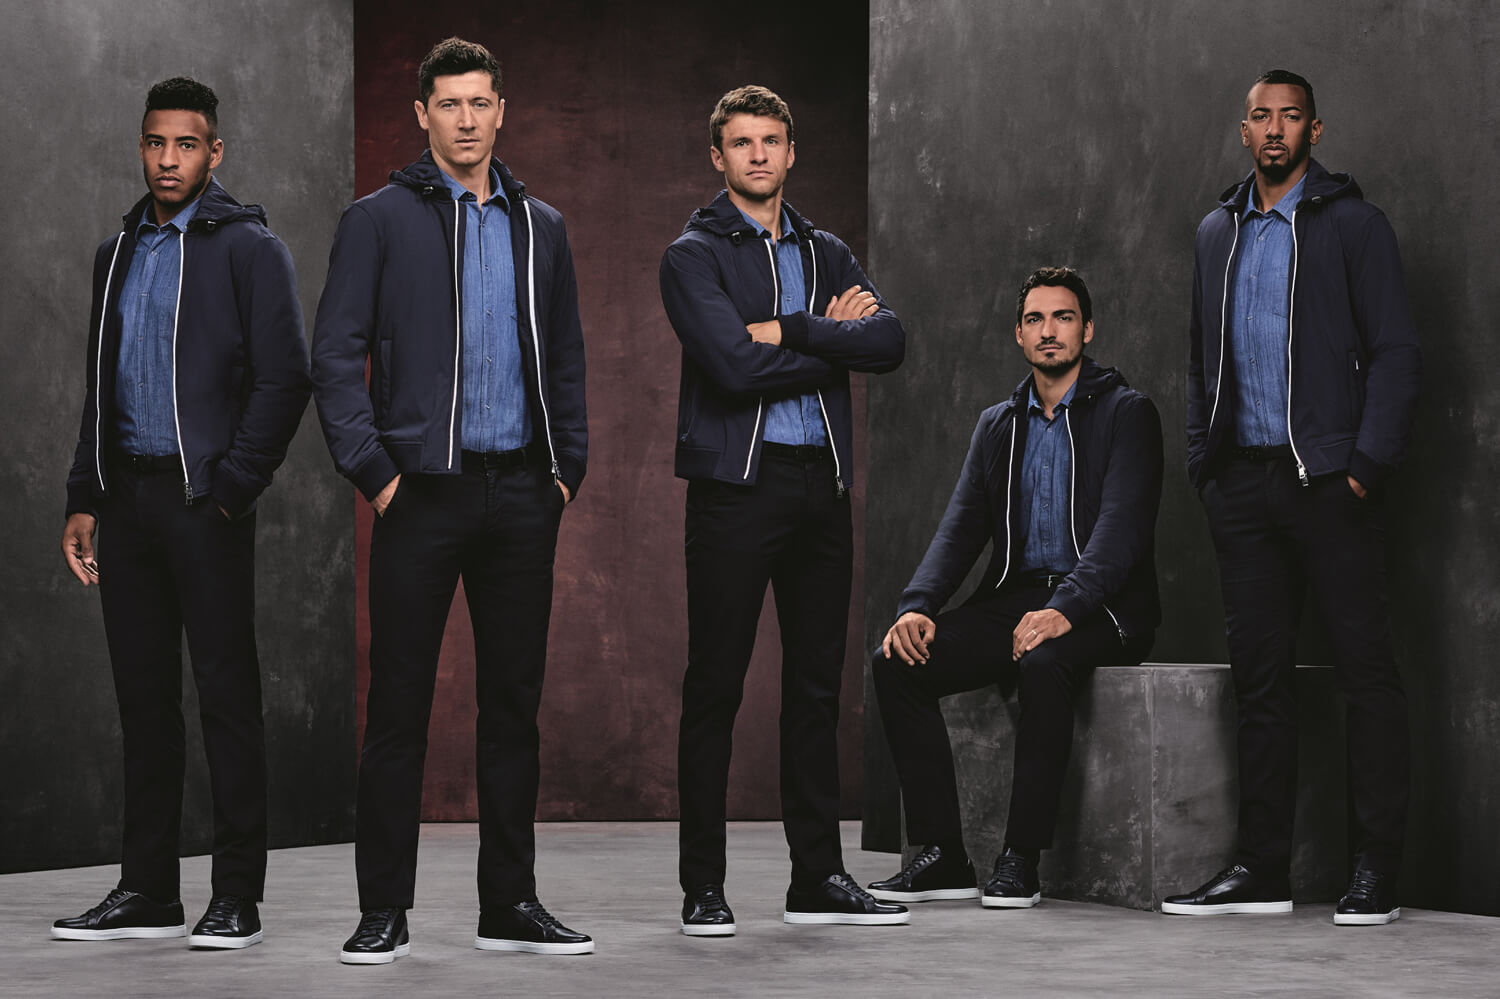 FC Bayern Munich flies in style with special BOSS collection - Men's Folio  Malaysia